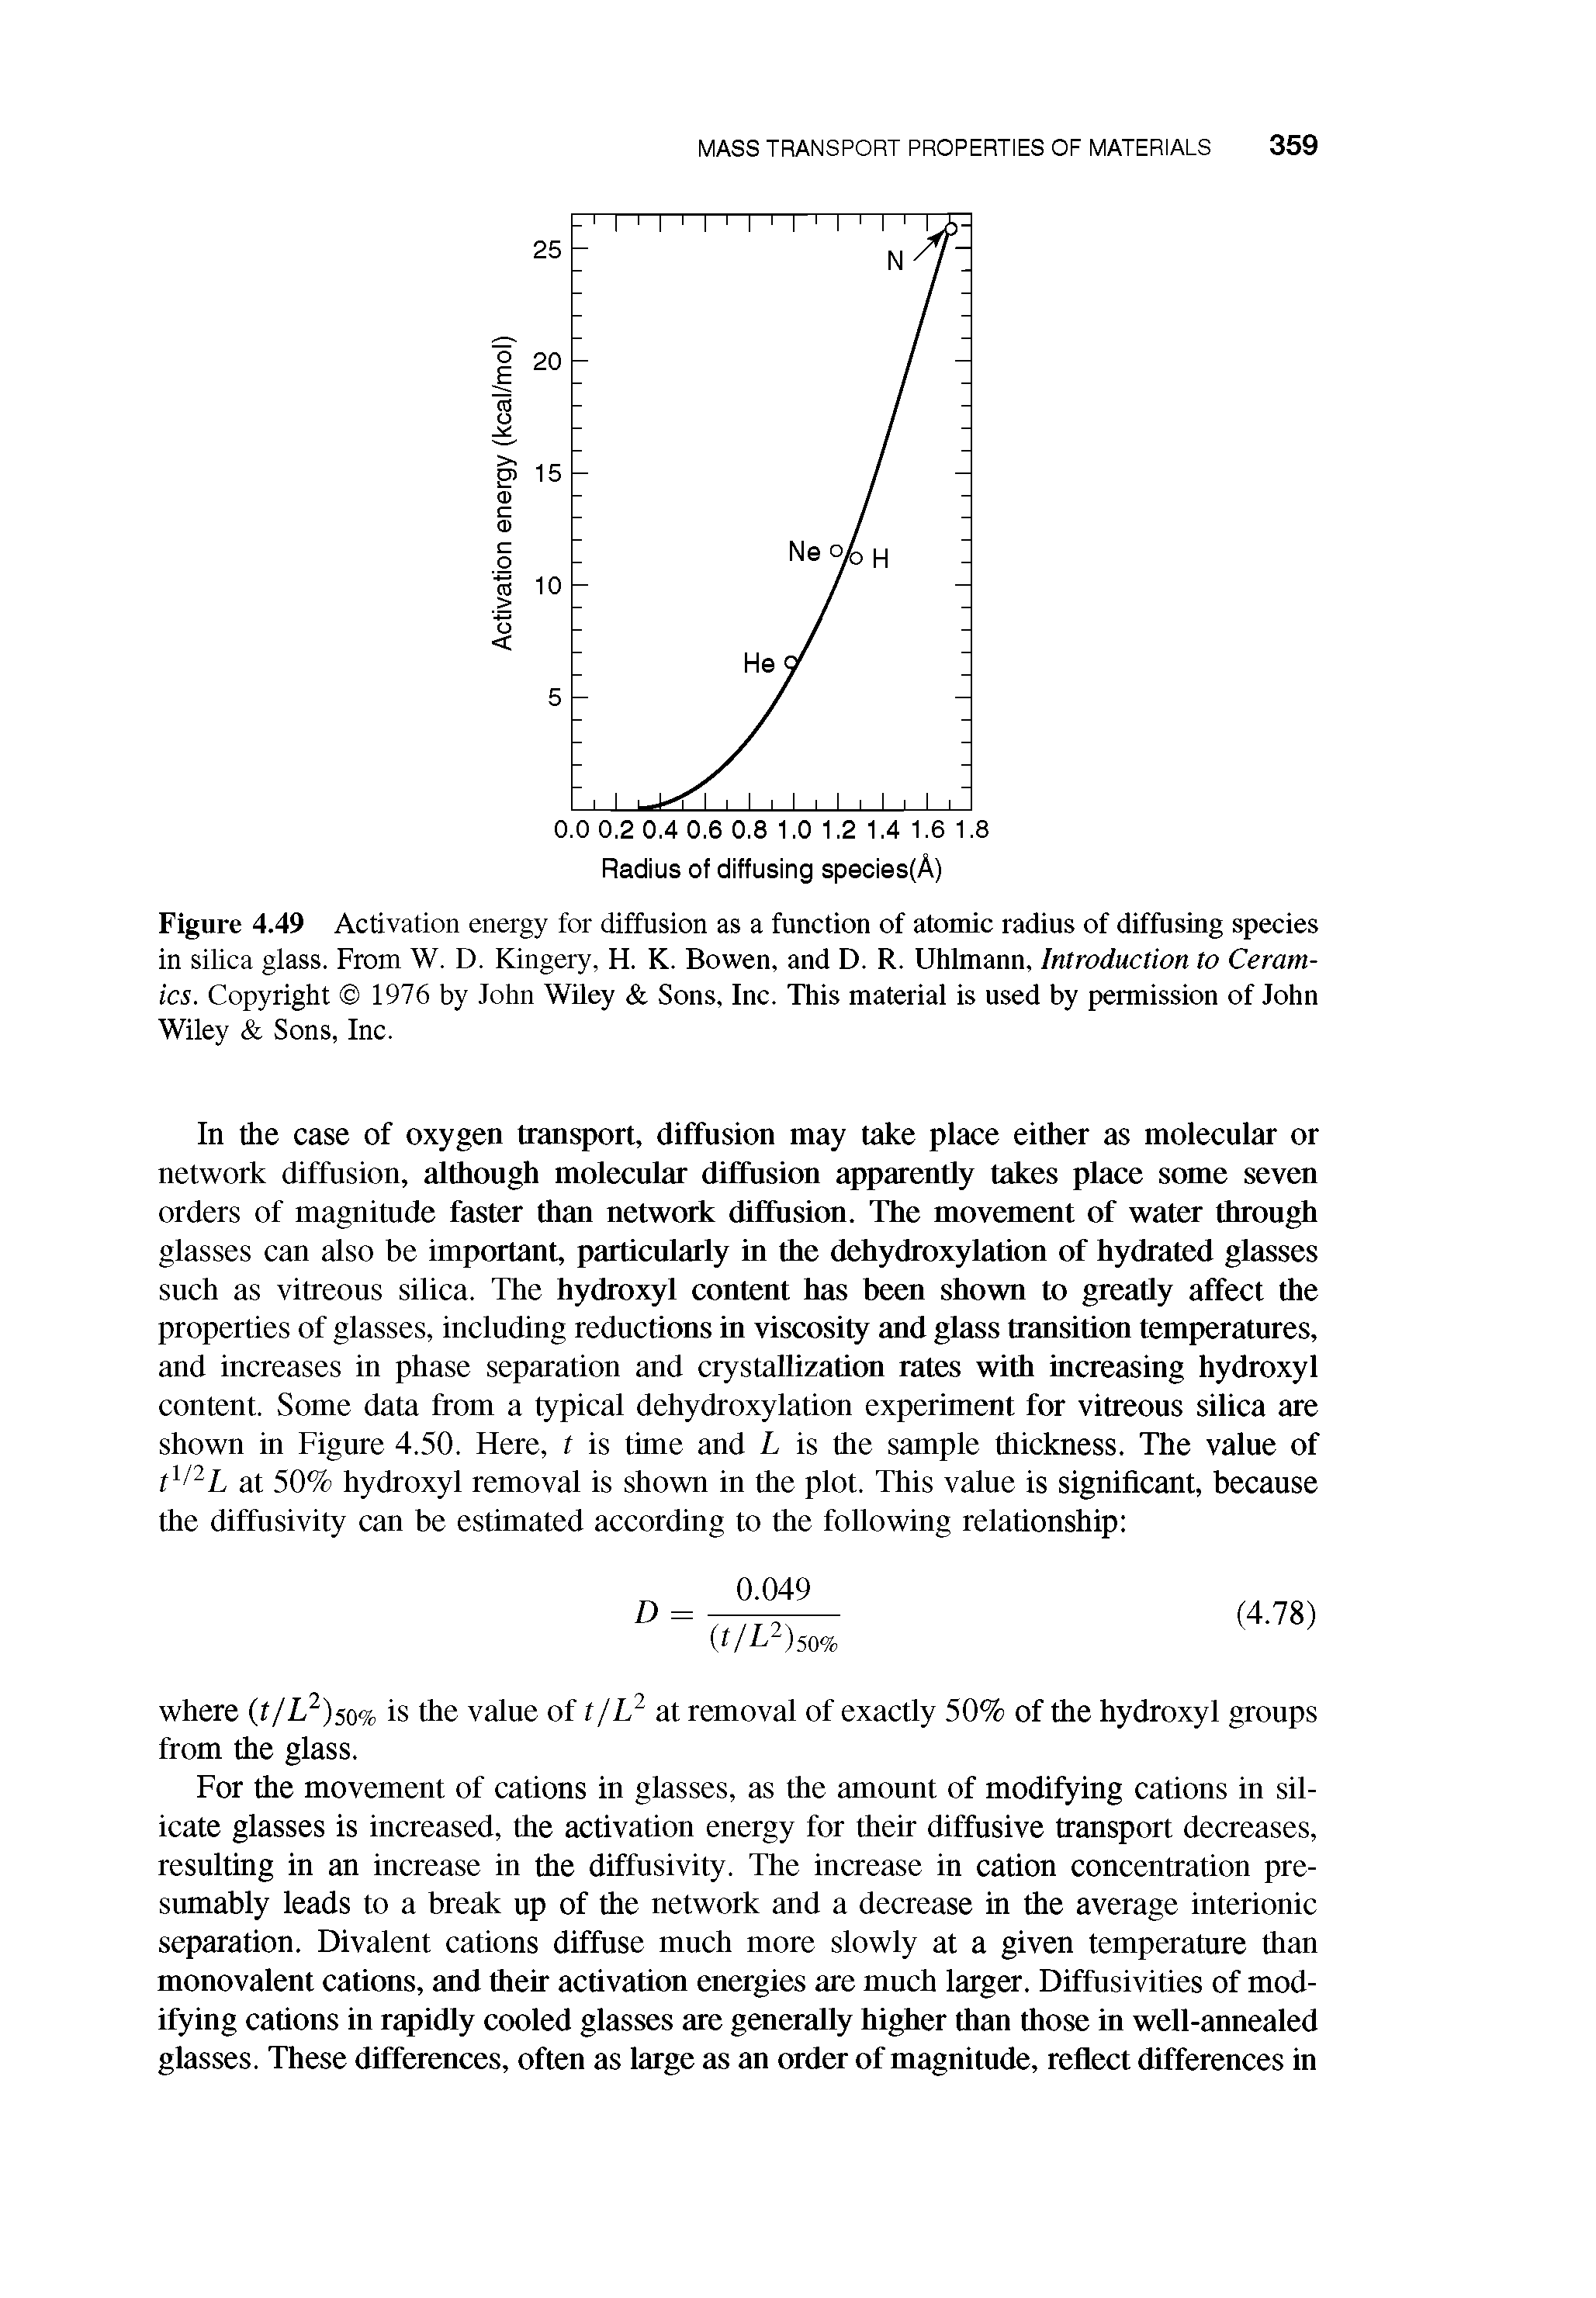 Figure 4.49 Activation energy for diffusion as a function of atomic radius of diffusing species in silica glass. From W. D. Kingery, H. K. Bowen, and D. R. Uhlmann, Introduction to Ceramics. Copyright 1976 by John WUey Sons, Inc. This material is used by permission of John Wiley Sons, Inc.